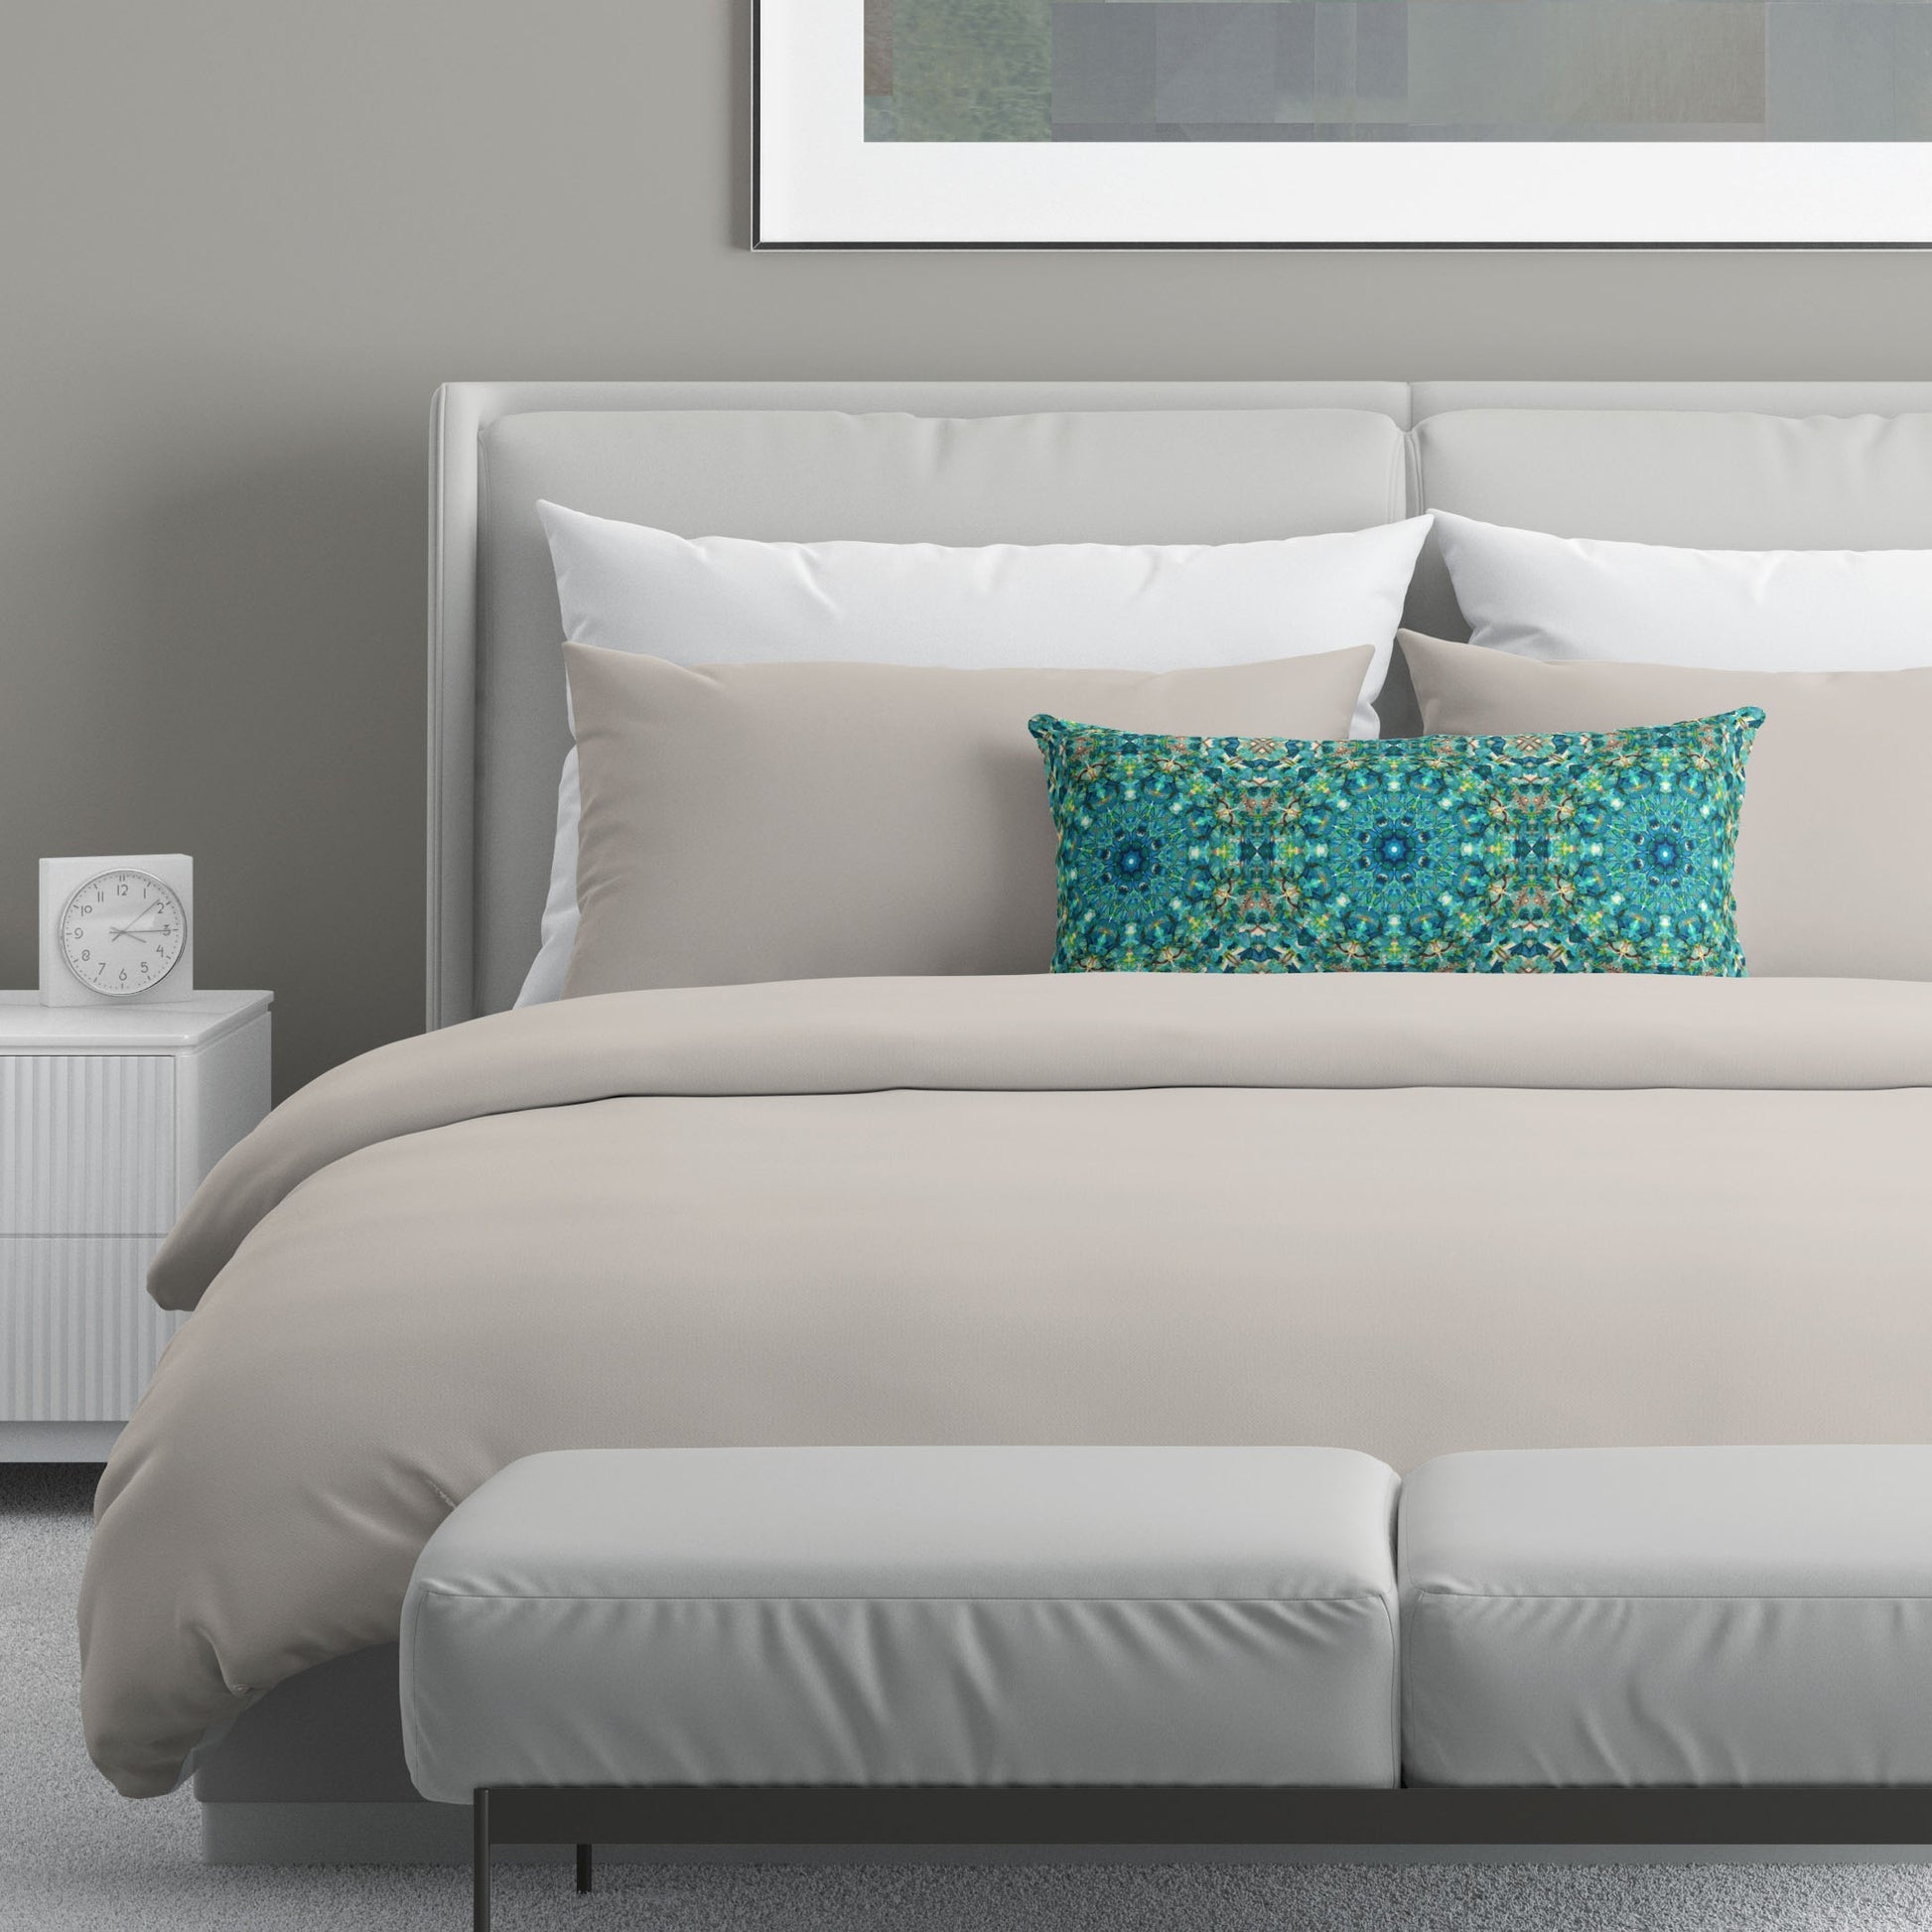 Neutral colored bedroom featuring a bed with a teal abstract patterned lumbar pillow.